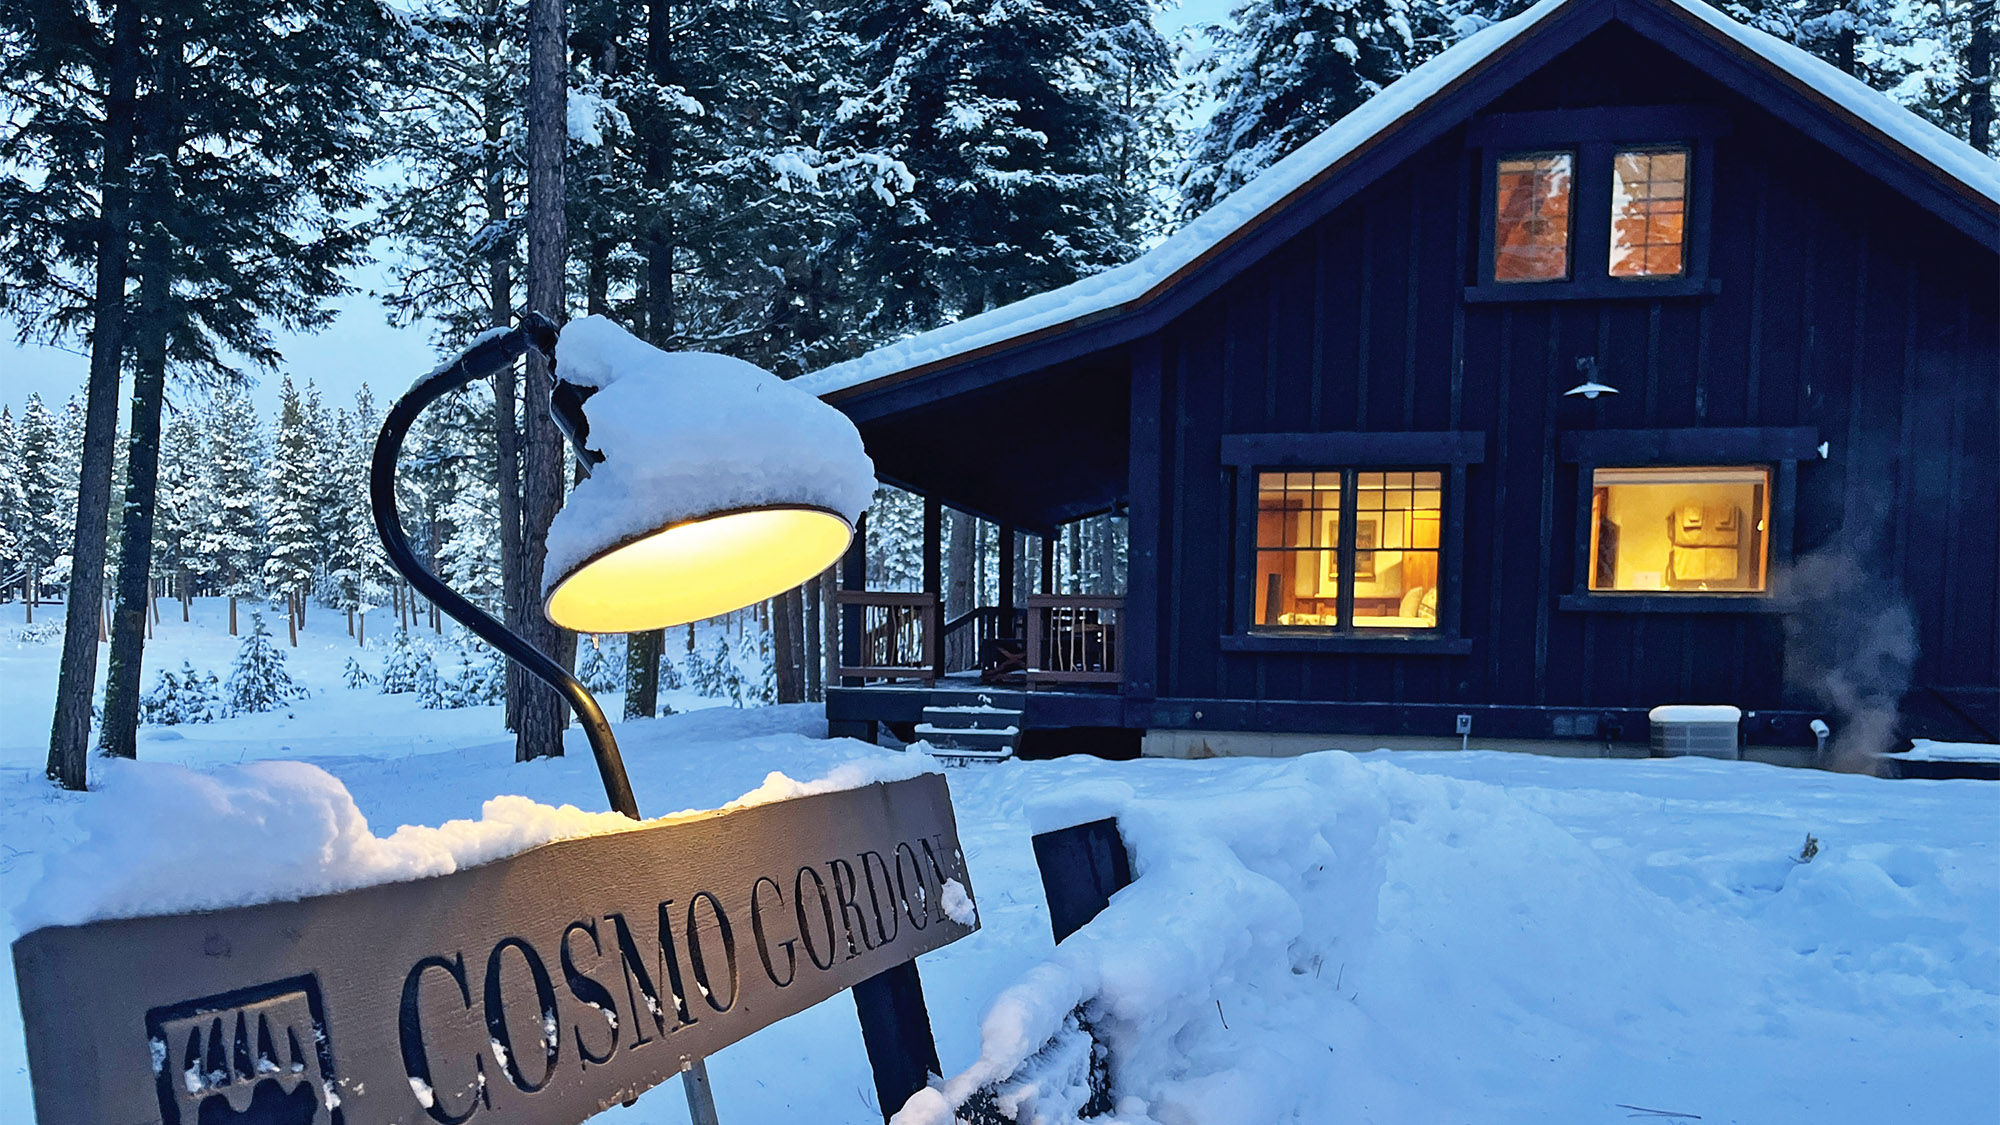 The Cosmo Gordon Lodge is part of the Big Timber Home collection featured at the Resort at Paws Up.